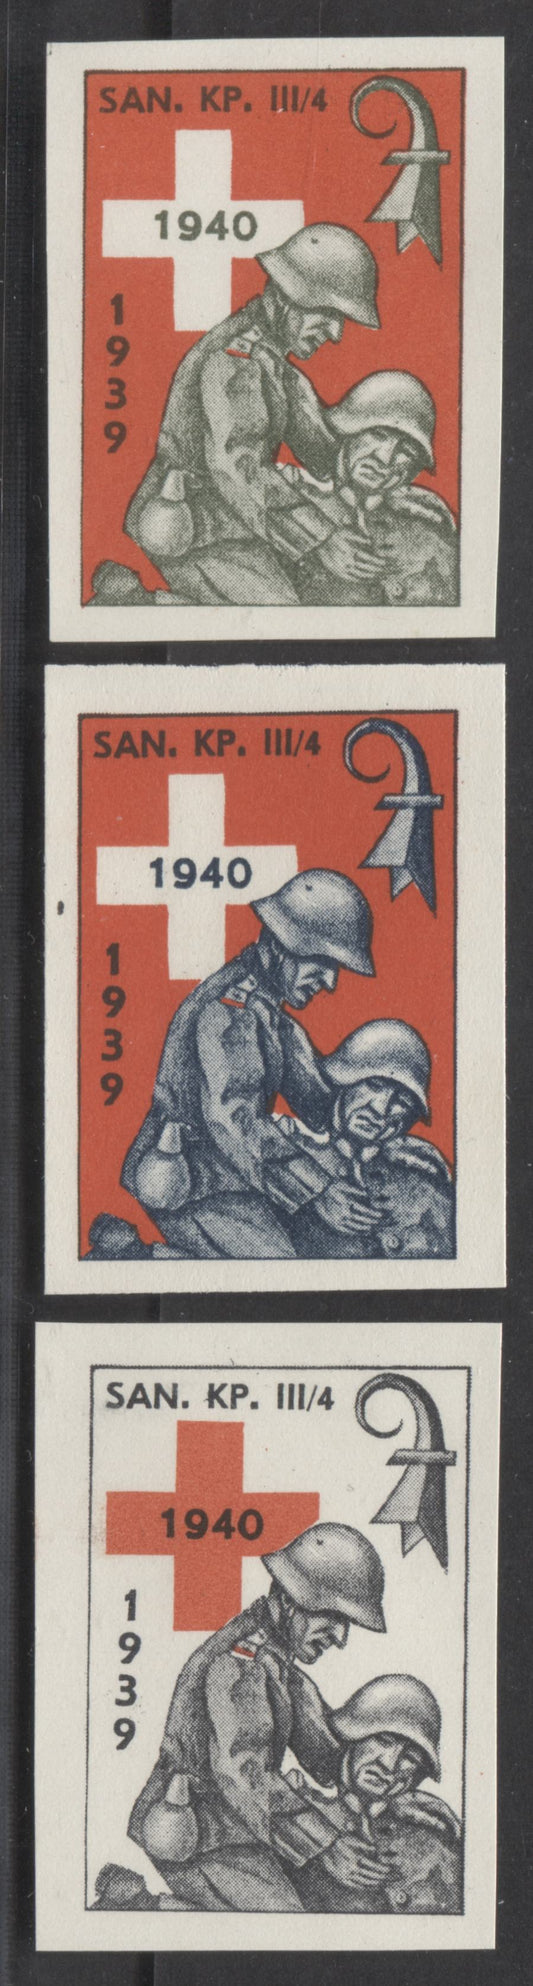 Lot 94 Switzerland SC#Unlisted  1939 - 1940 Military Stamp Issue - SAN. KP. III/4 Division, 1940 Overprints, Imperf, 3 VFOG Examples, Click on Listing to See ALL Pictures, Estimated Value $12 USD